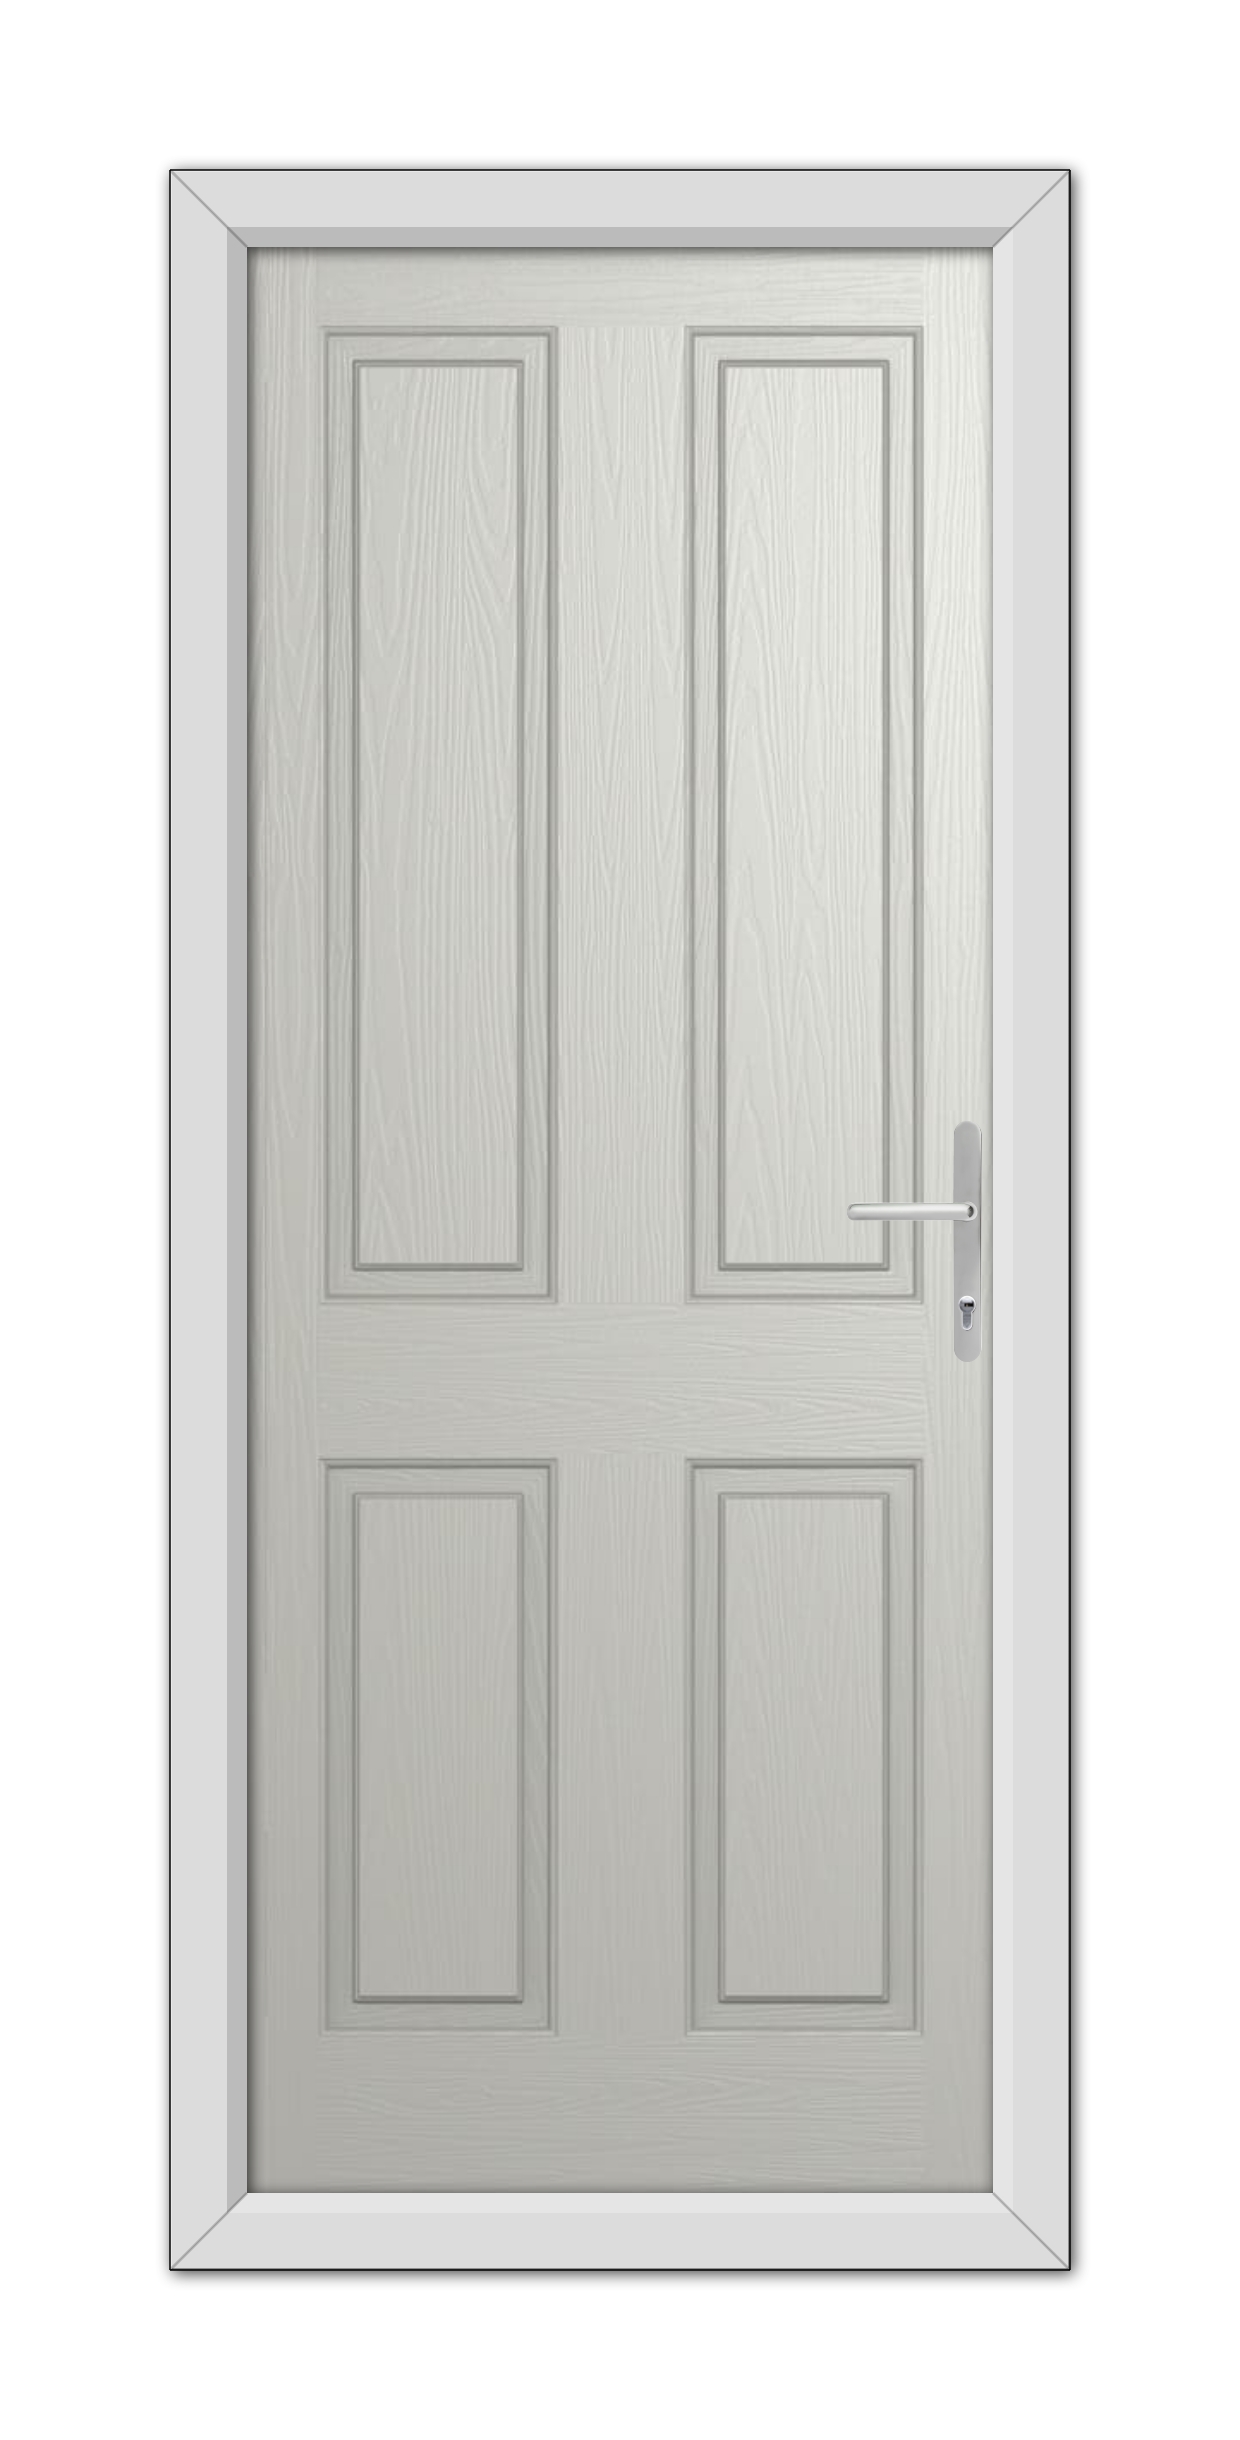 A modern Agate Grey Whitmore Solid Composite Door 48mm Timber Core with four panels and metal handle, set within a white door frame.